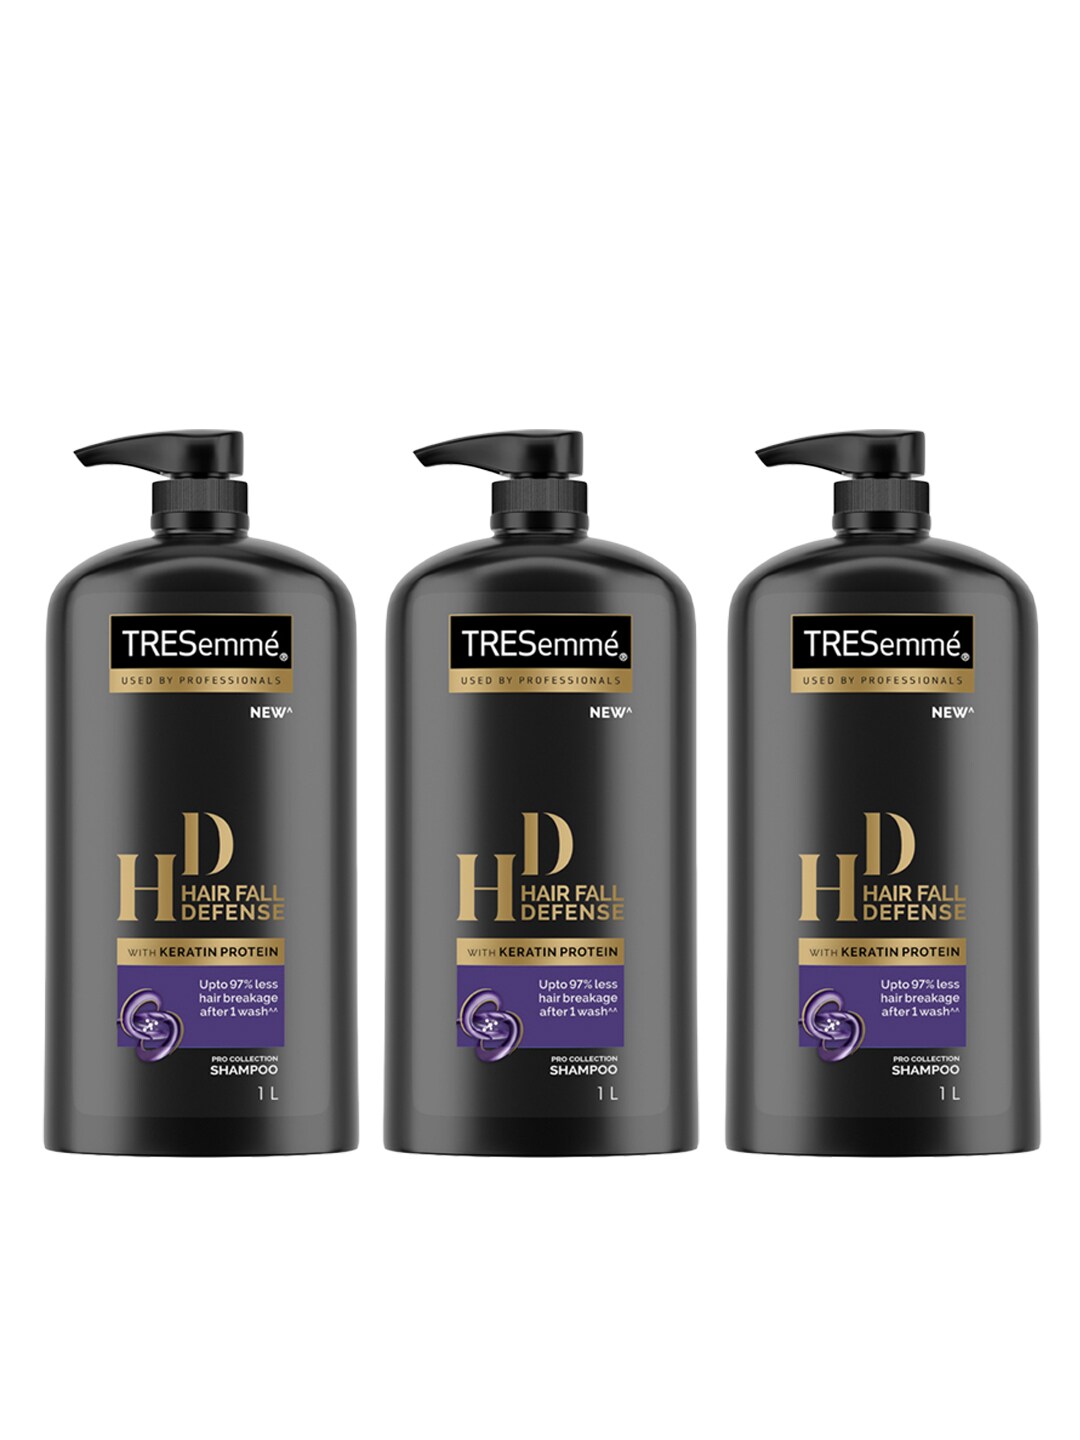 TRESemme Set of 3 Hair Fall Defense Shampoos with Keratin Protein - 1 Litre each Price in India